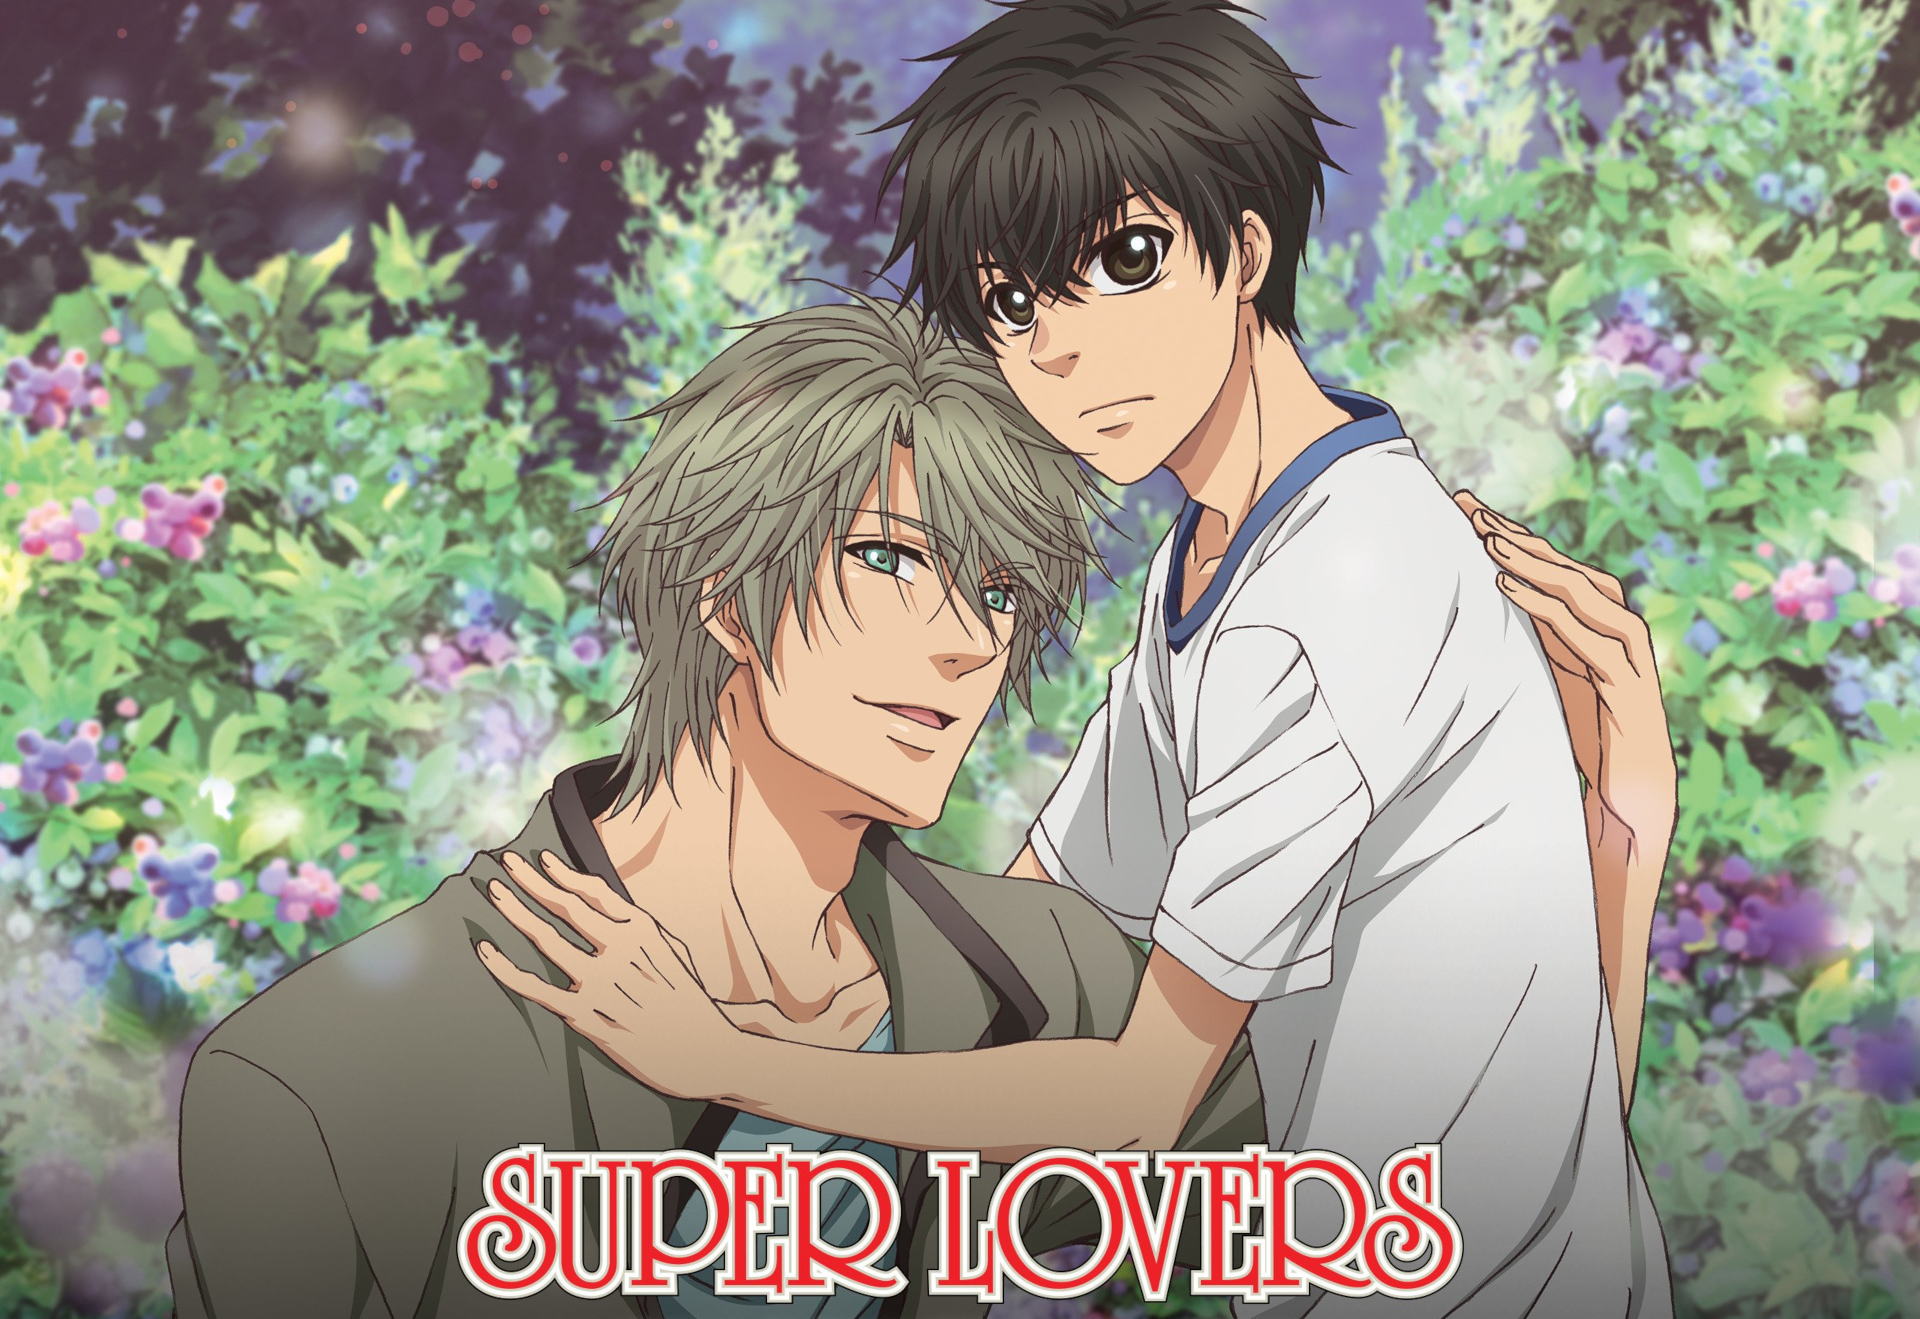 BL Anime - List of 25 Best Yaoi anime series and movies | Recommendations |  PsychoWeird